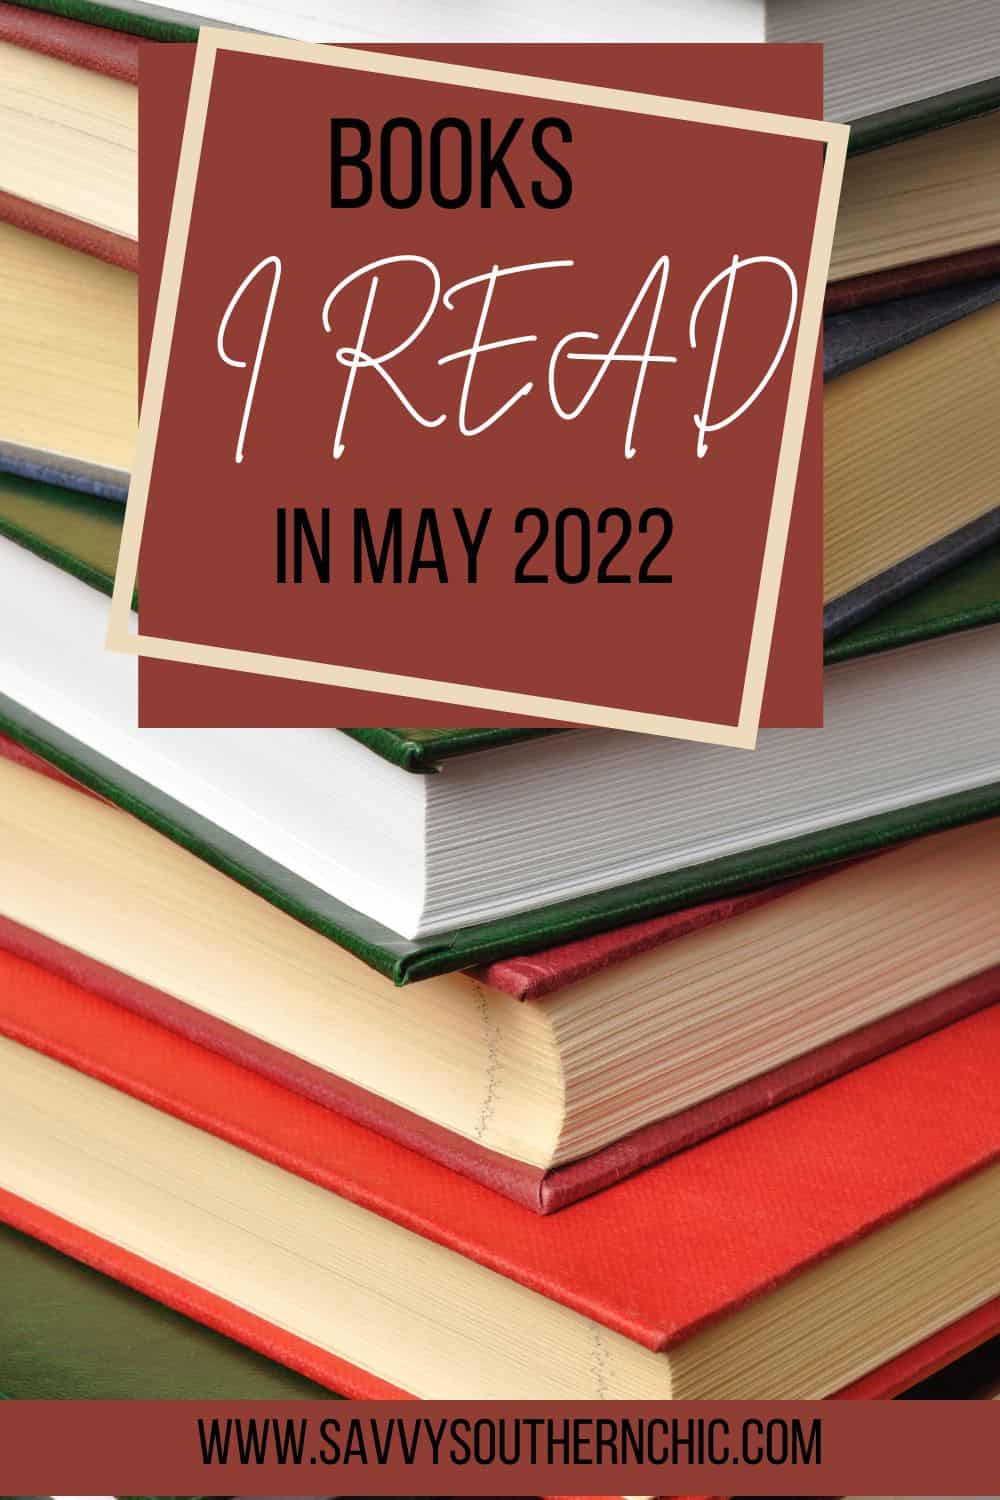 The Books I Read in May 2022